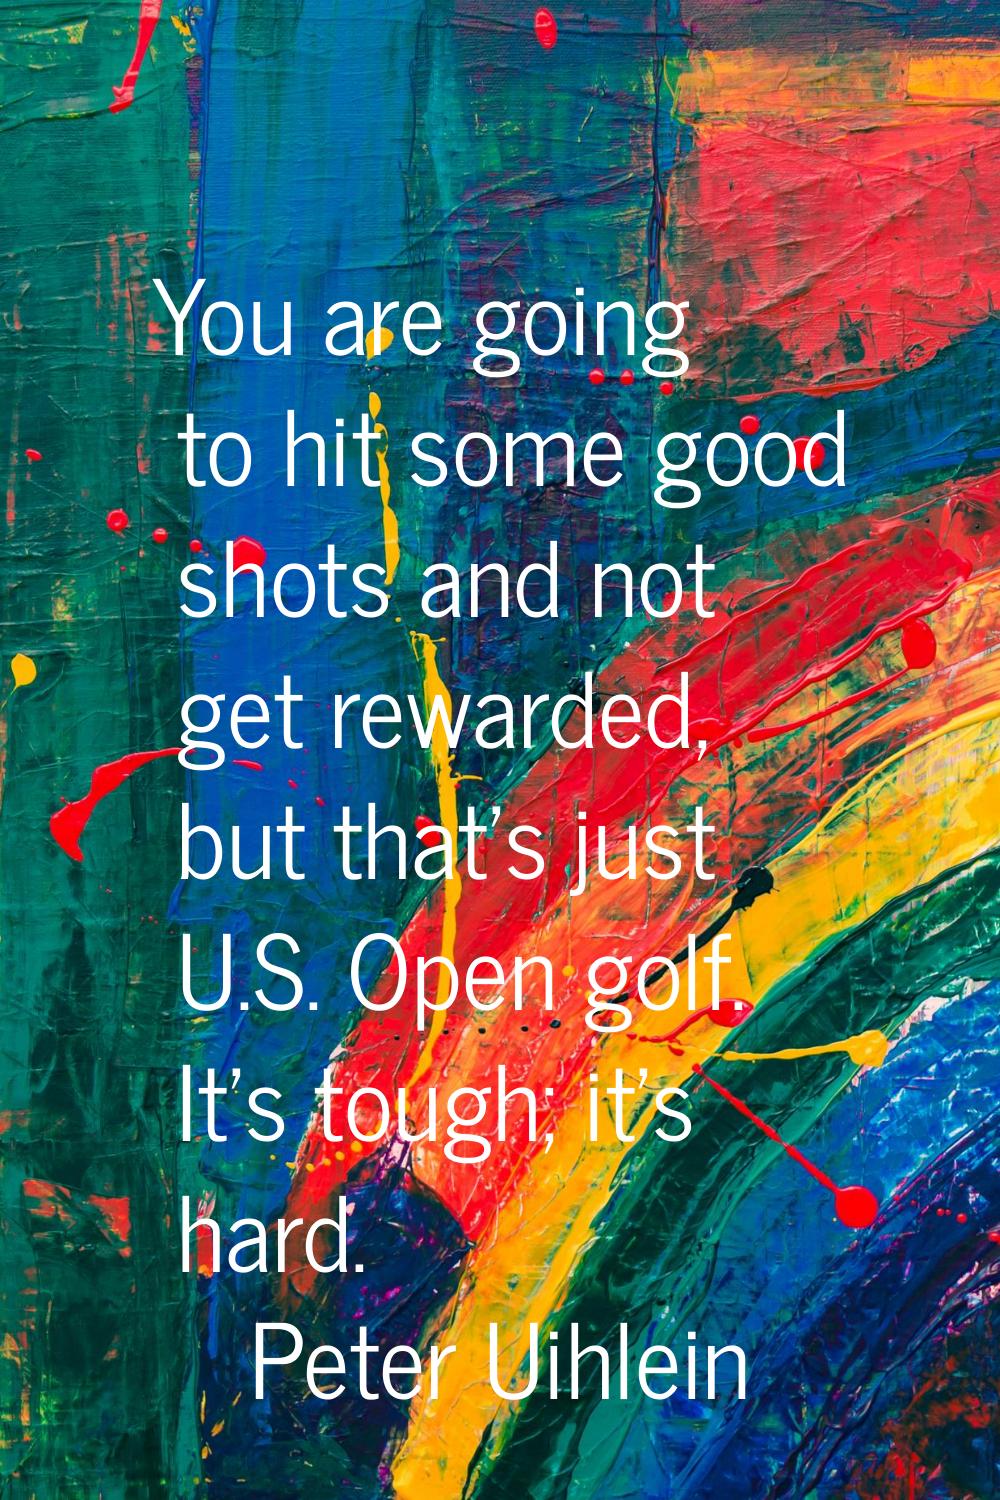 You are going to hit some good shots and not get rewarded, but that's just U.S. Open golf. It's tou